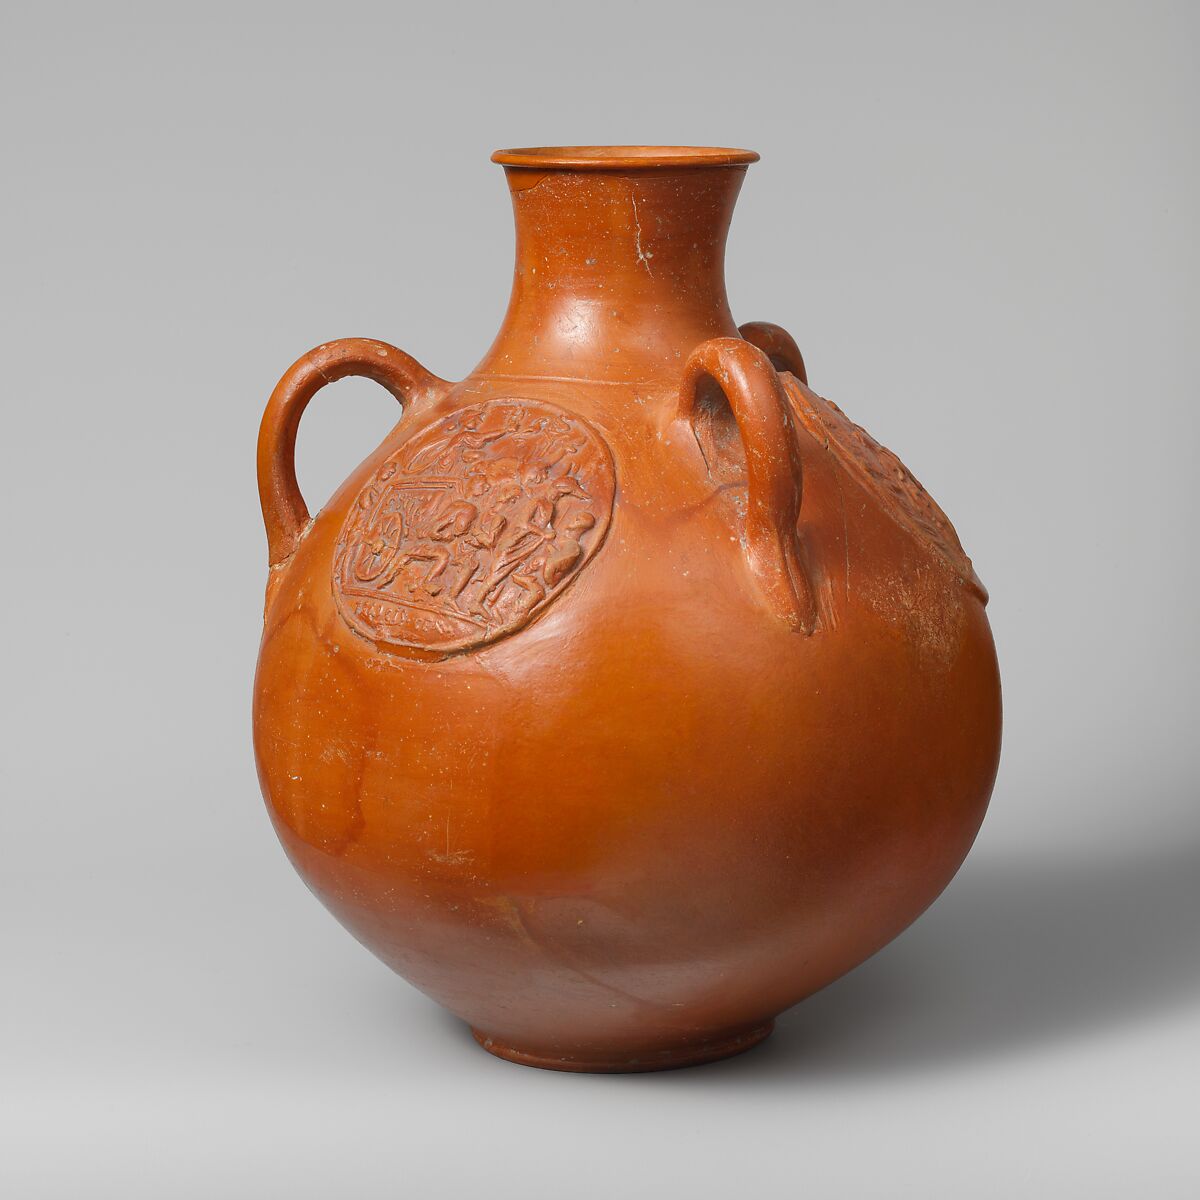 Three-handled jug with relief medallions, Terracotta, Roman 